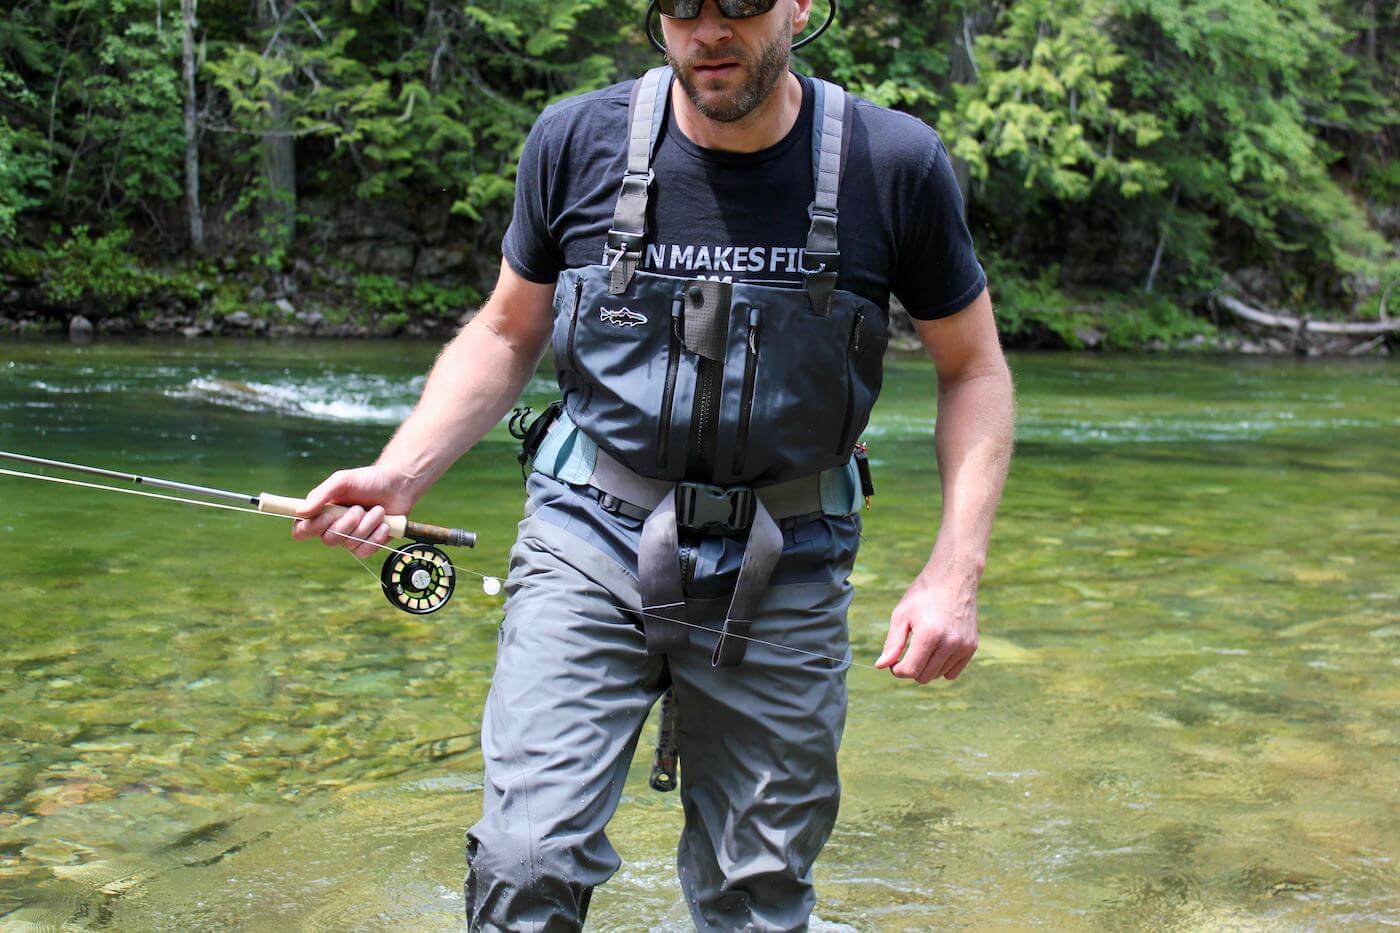 This photo shows the author testing the Patagonia Swiftcurrent Expedition Zip-Front Waders while fishing on a river.